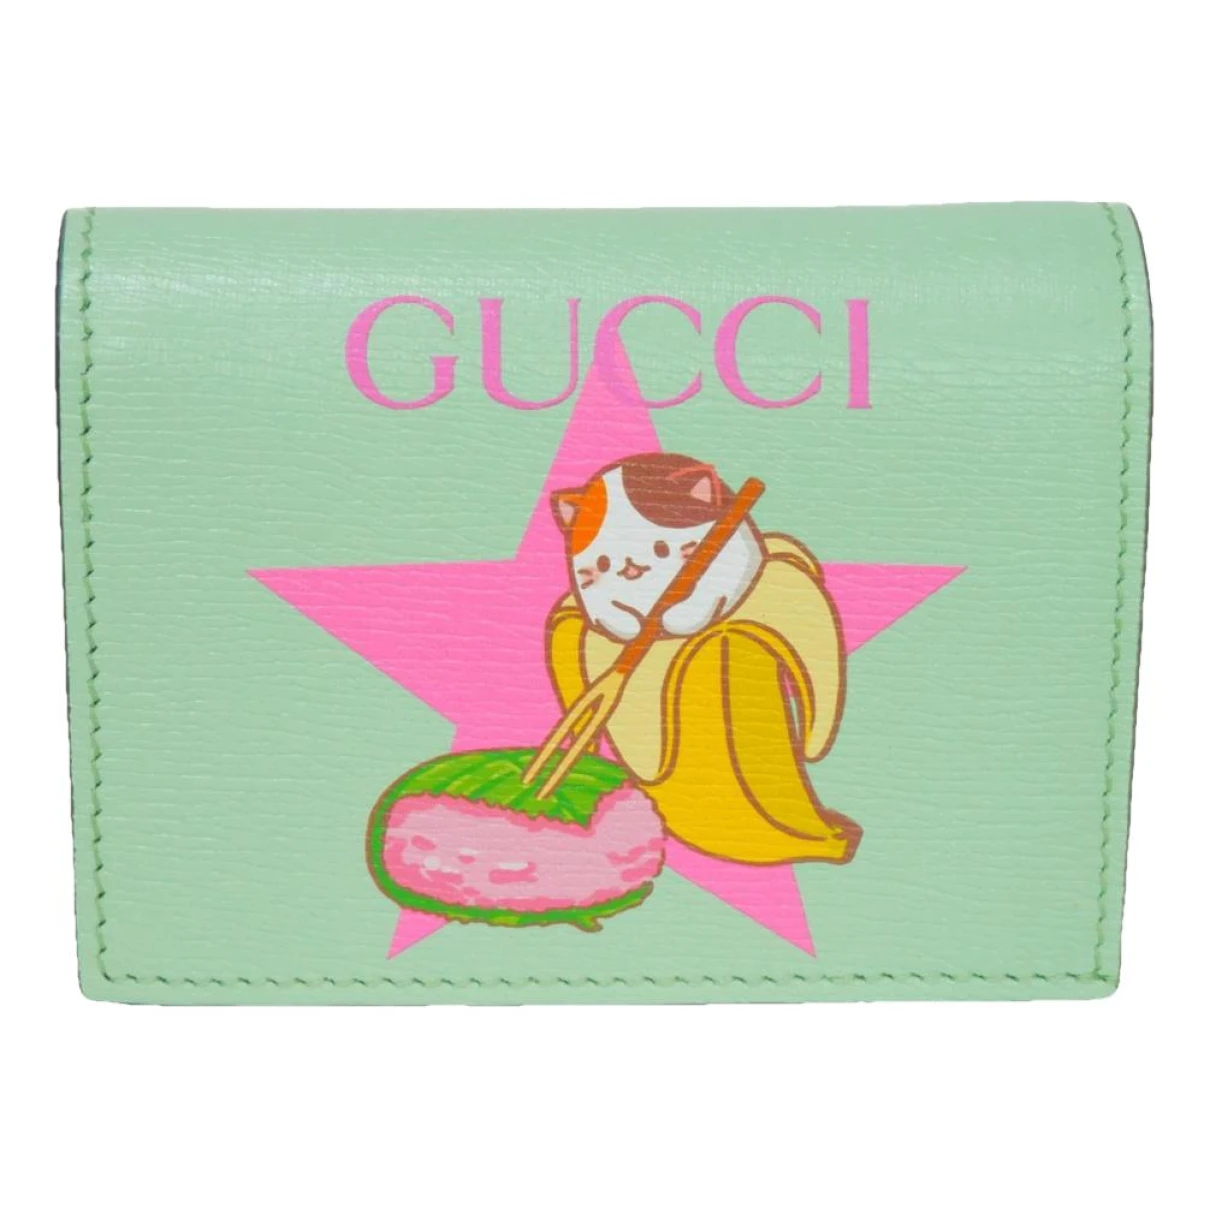 accessories Gucci purses, wallets & cases for Female Leather. Used condition